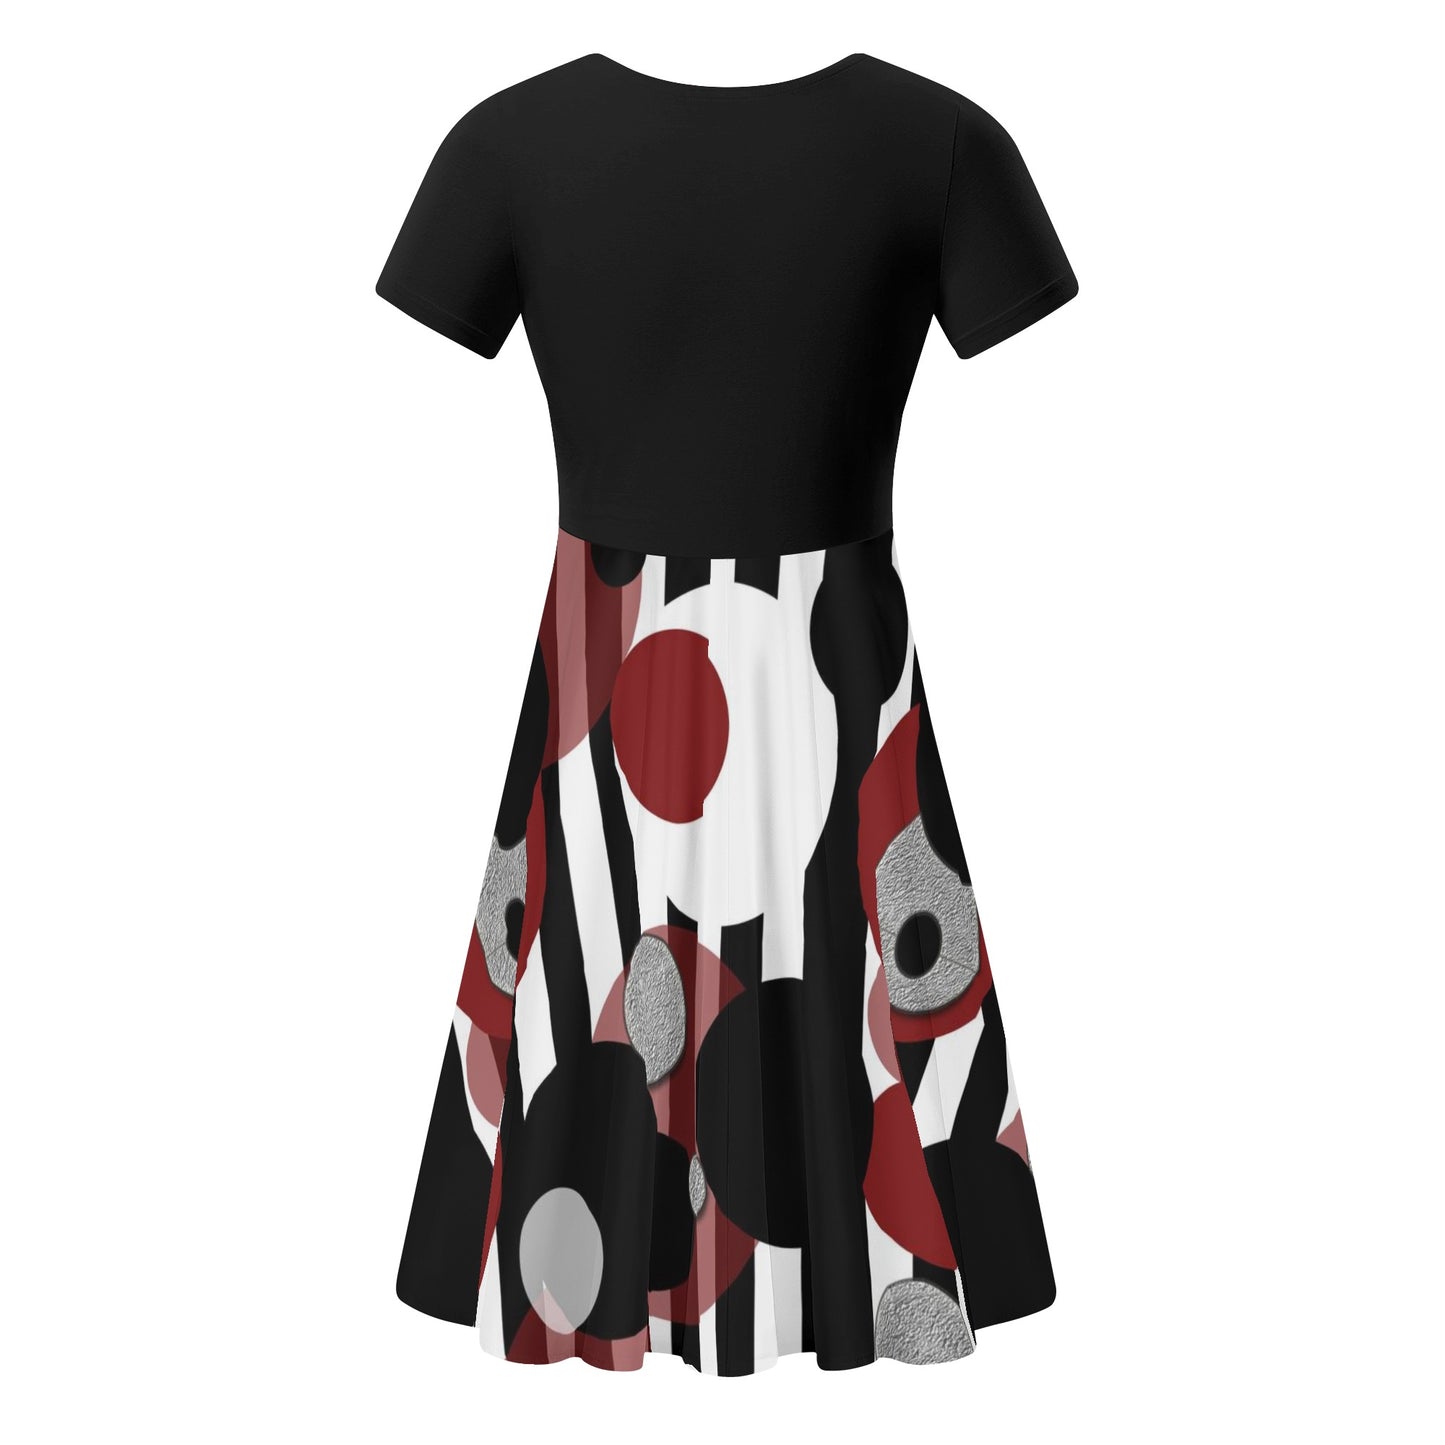 Black and White Stripes Red Dots Womens Black Ruffle Summer Dress